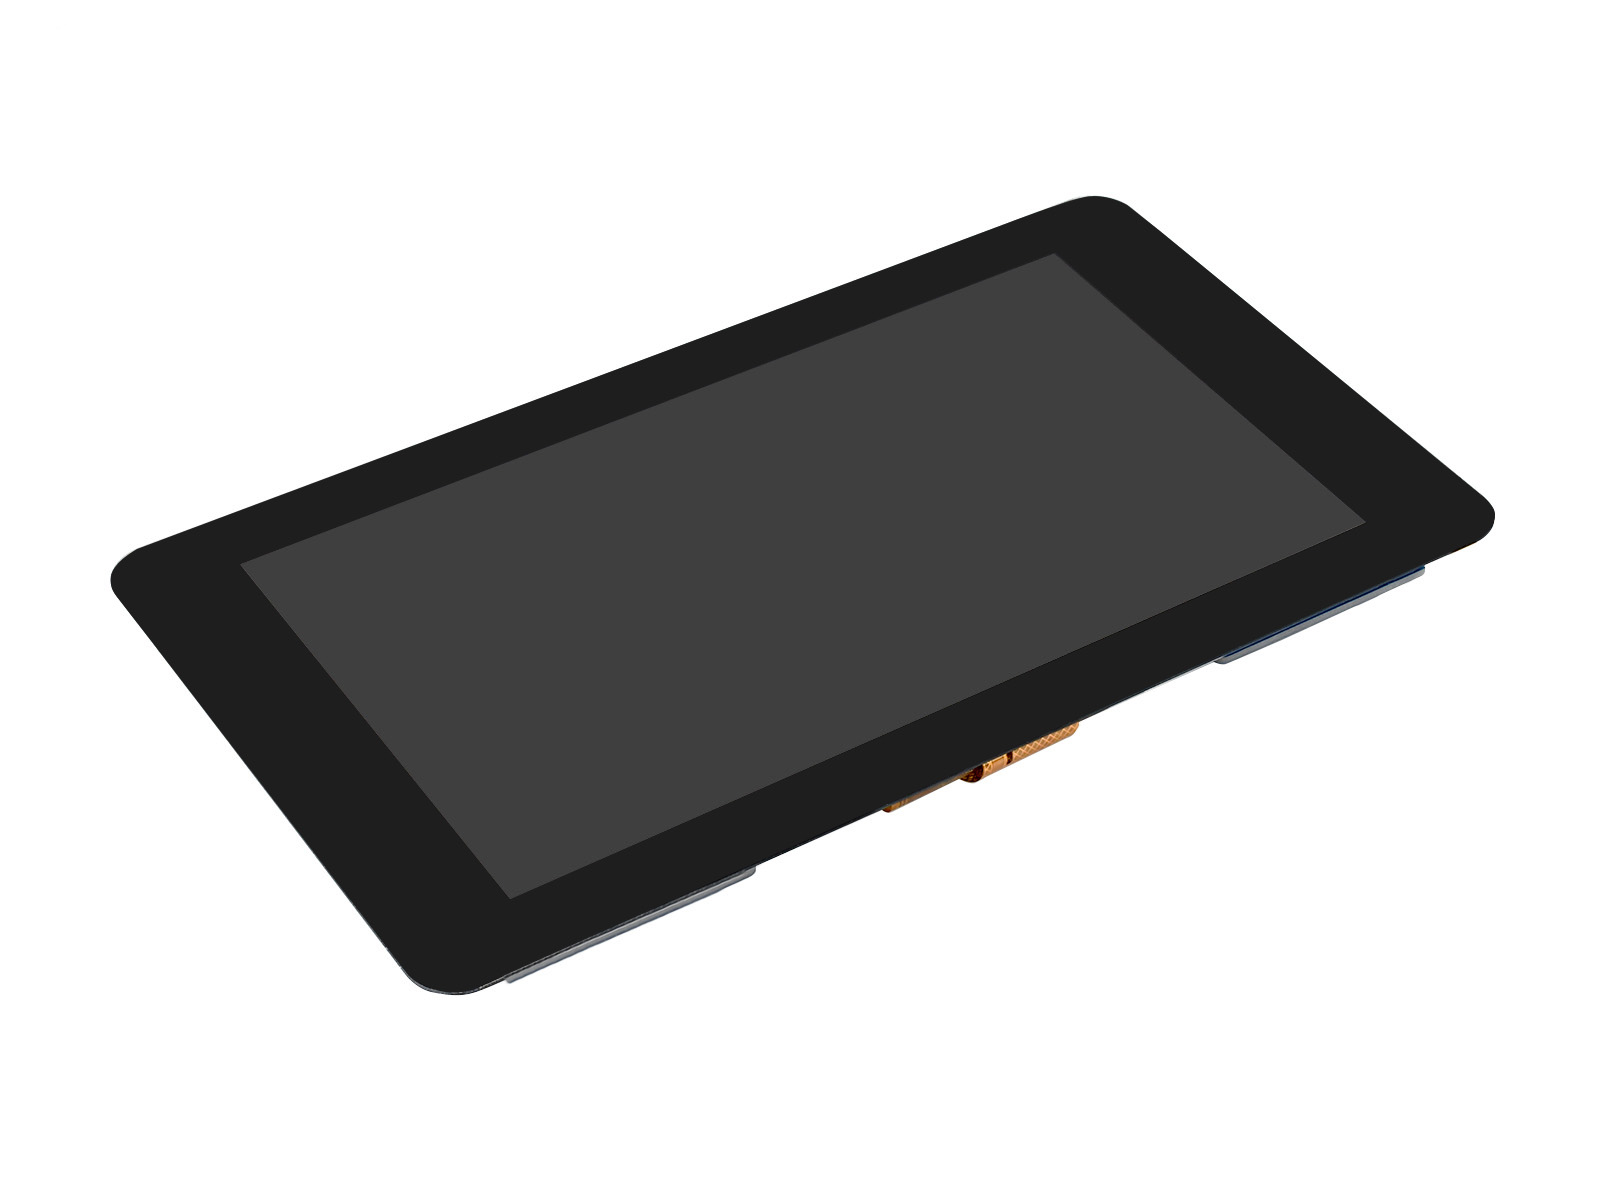 7inch Capacitive Touch Display For Raspberry Pi, 800×480, DSI Interface  7inch DSI LCD